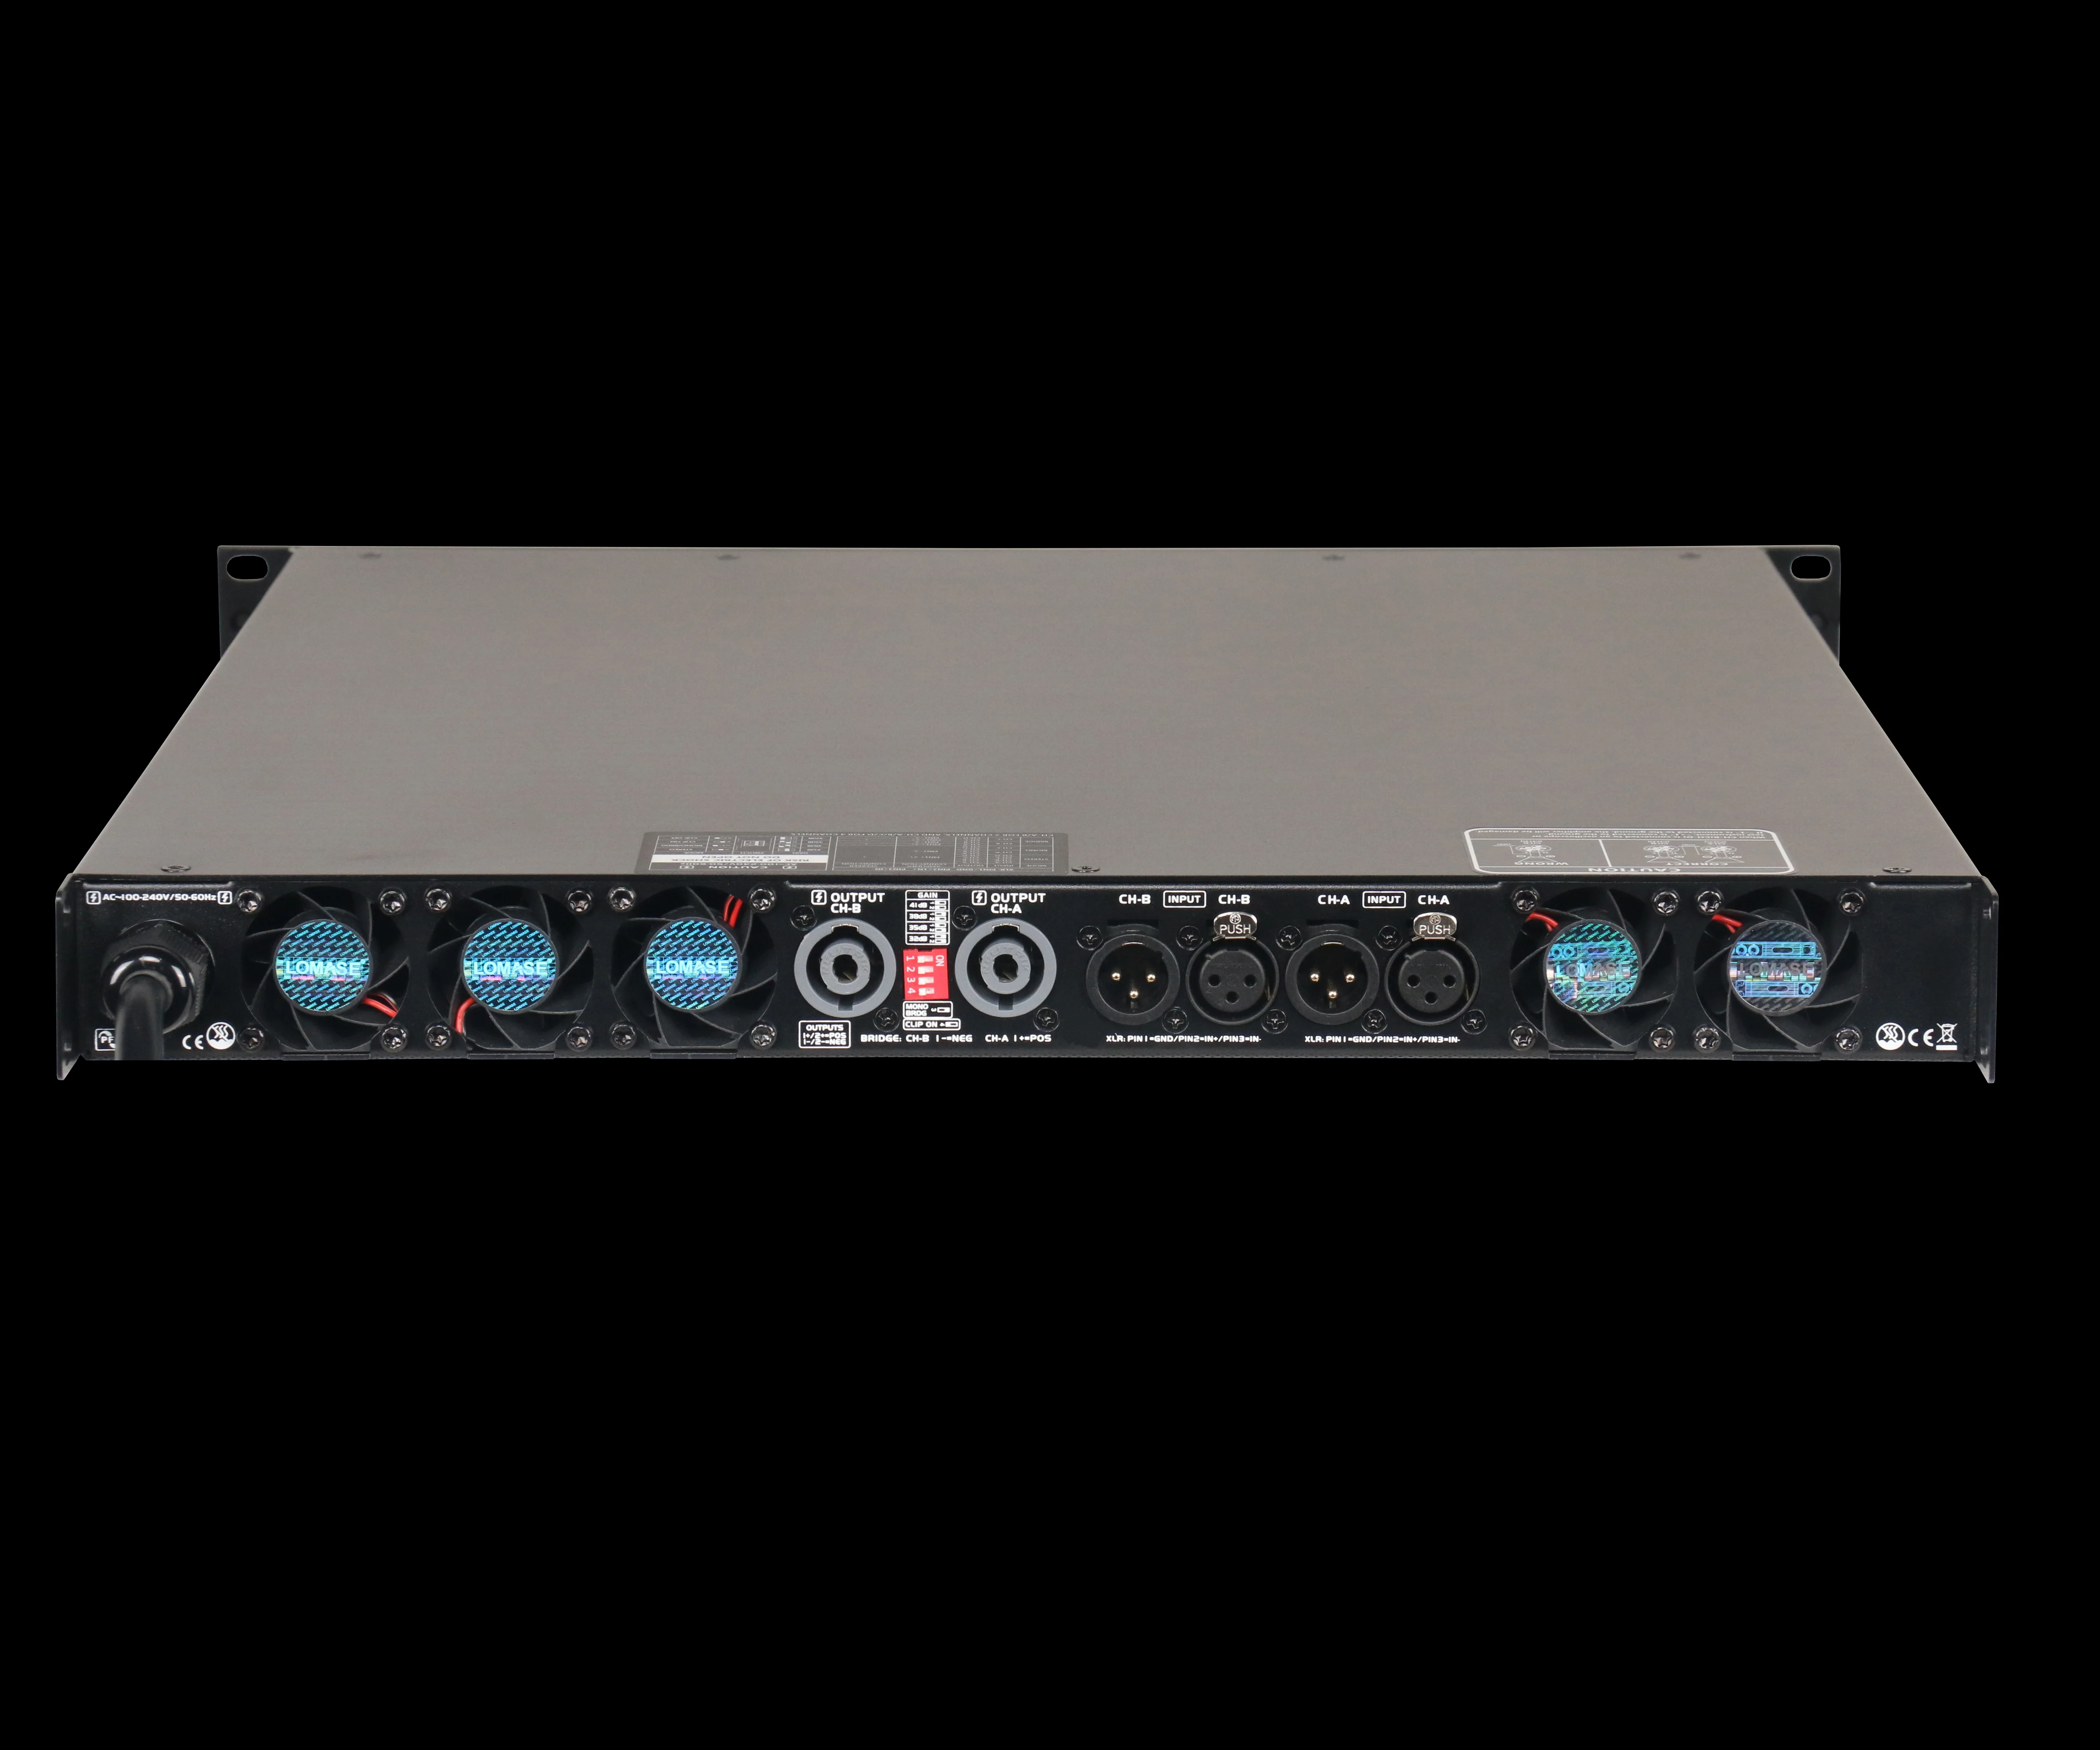 High quality 1U digital power amplifier 4500w with pfc function, high power